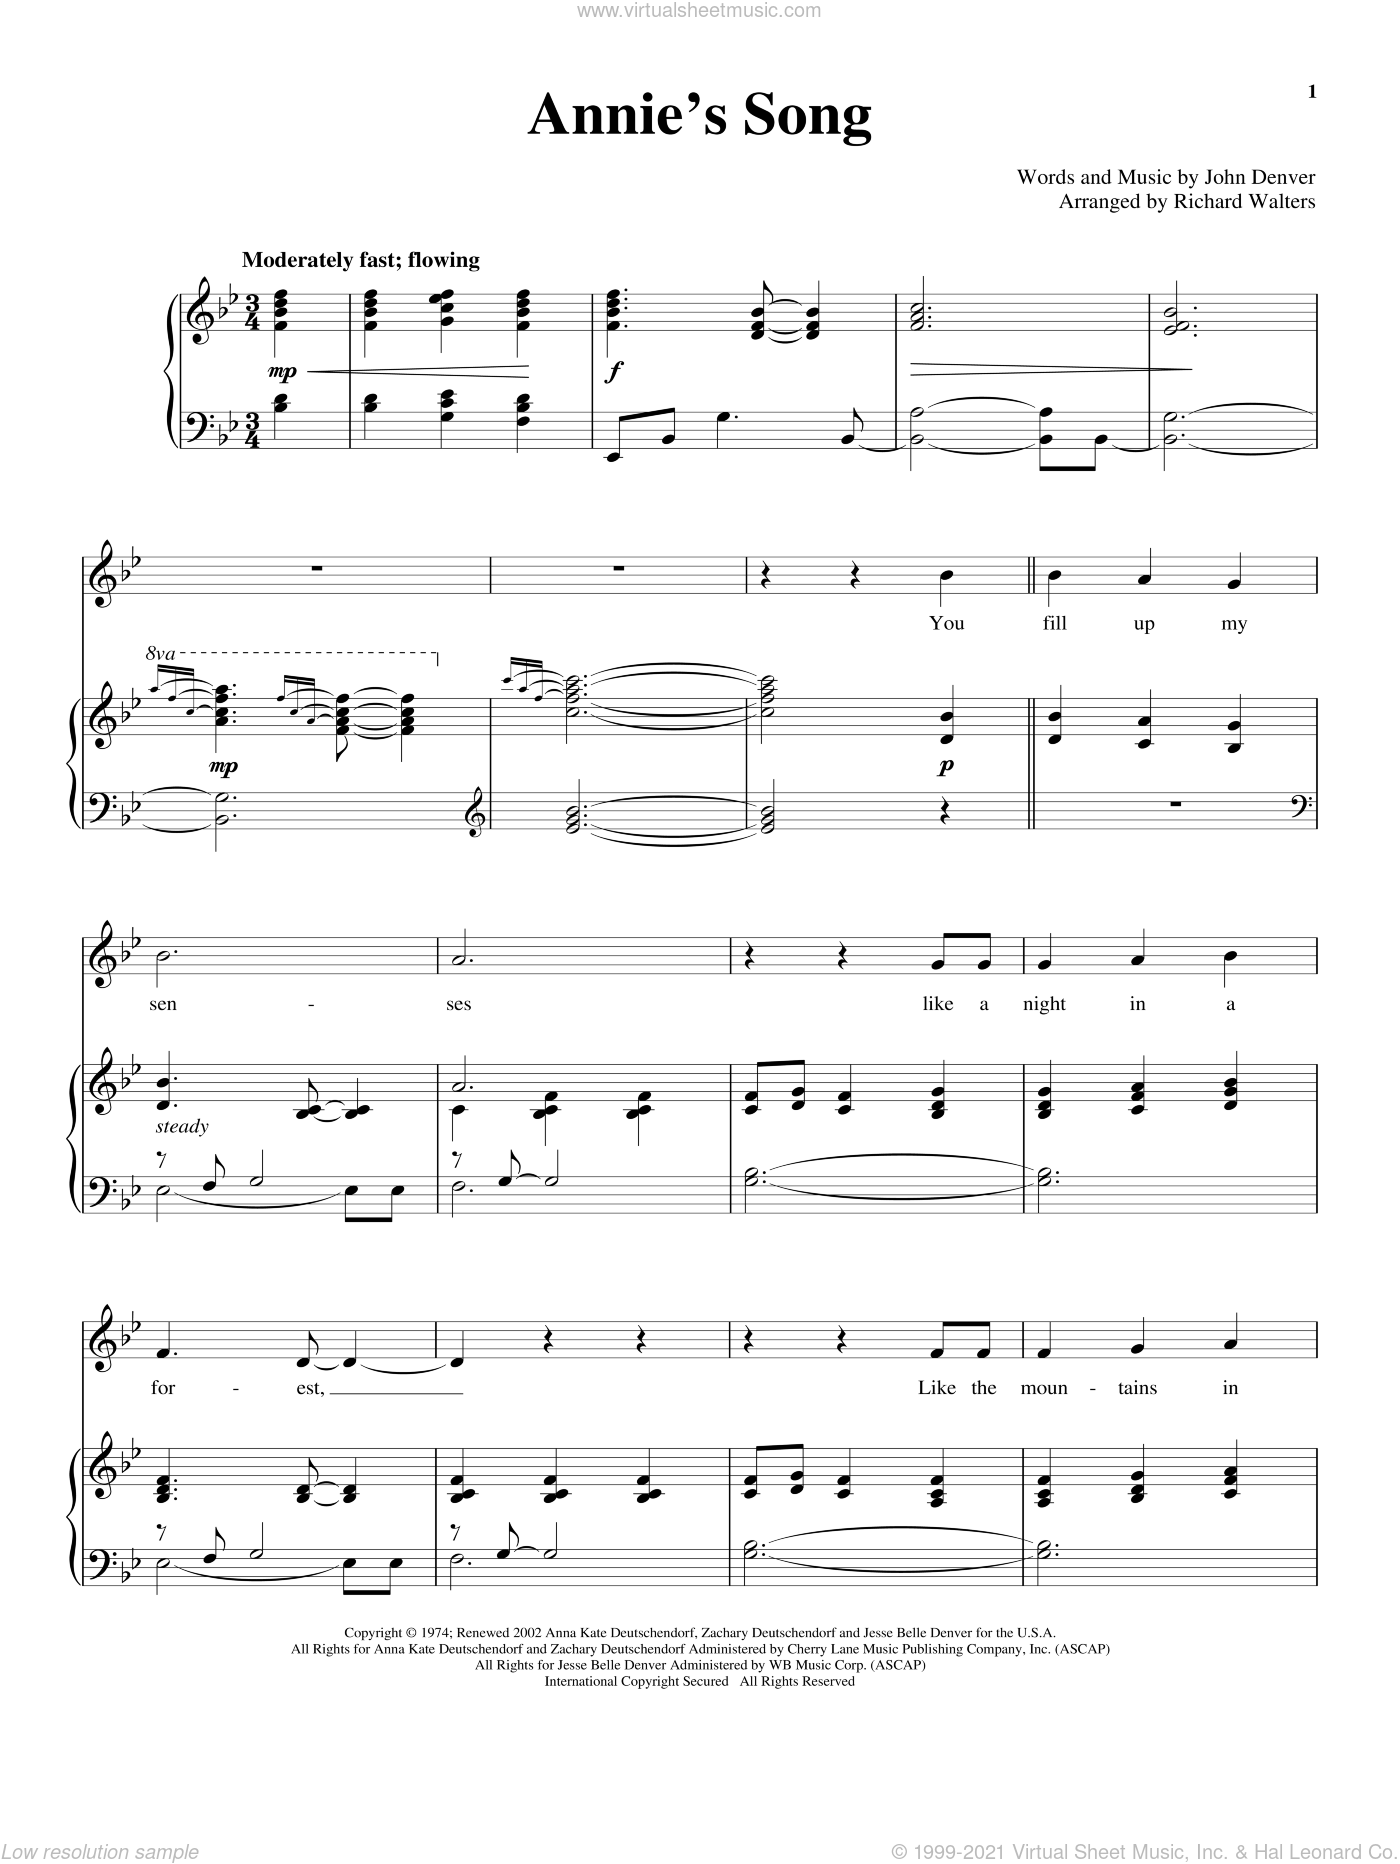 Denver - Annie's Song sheet music for voice and piano (PDF) .